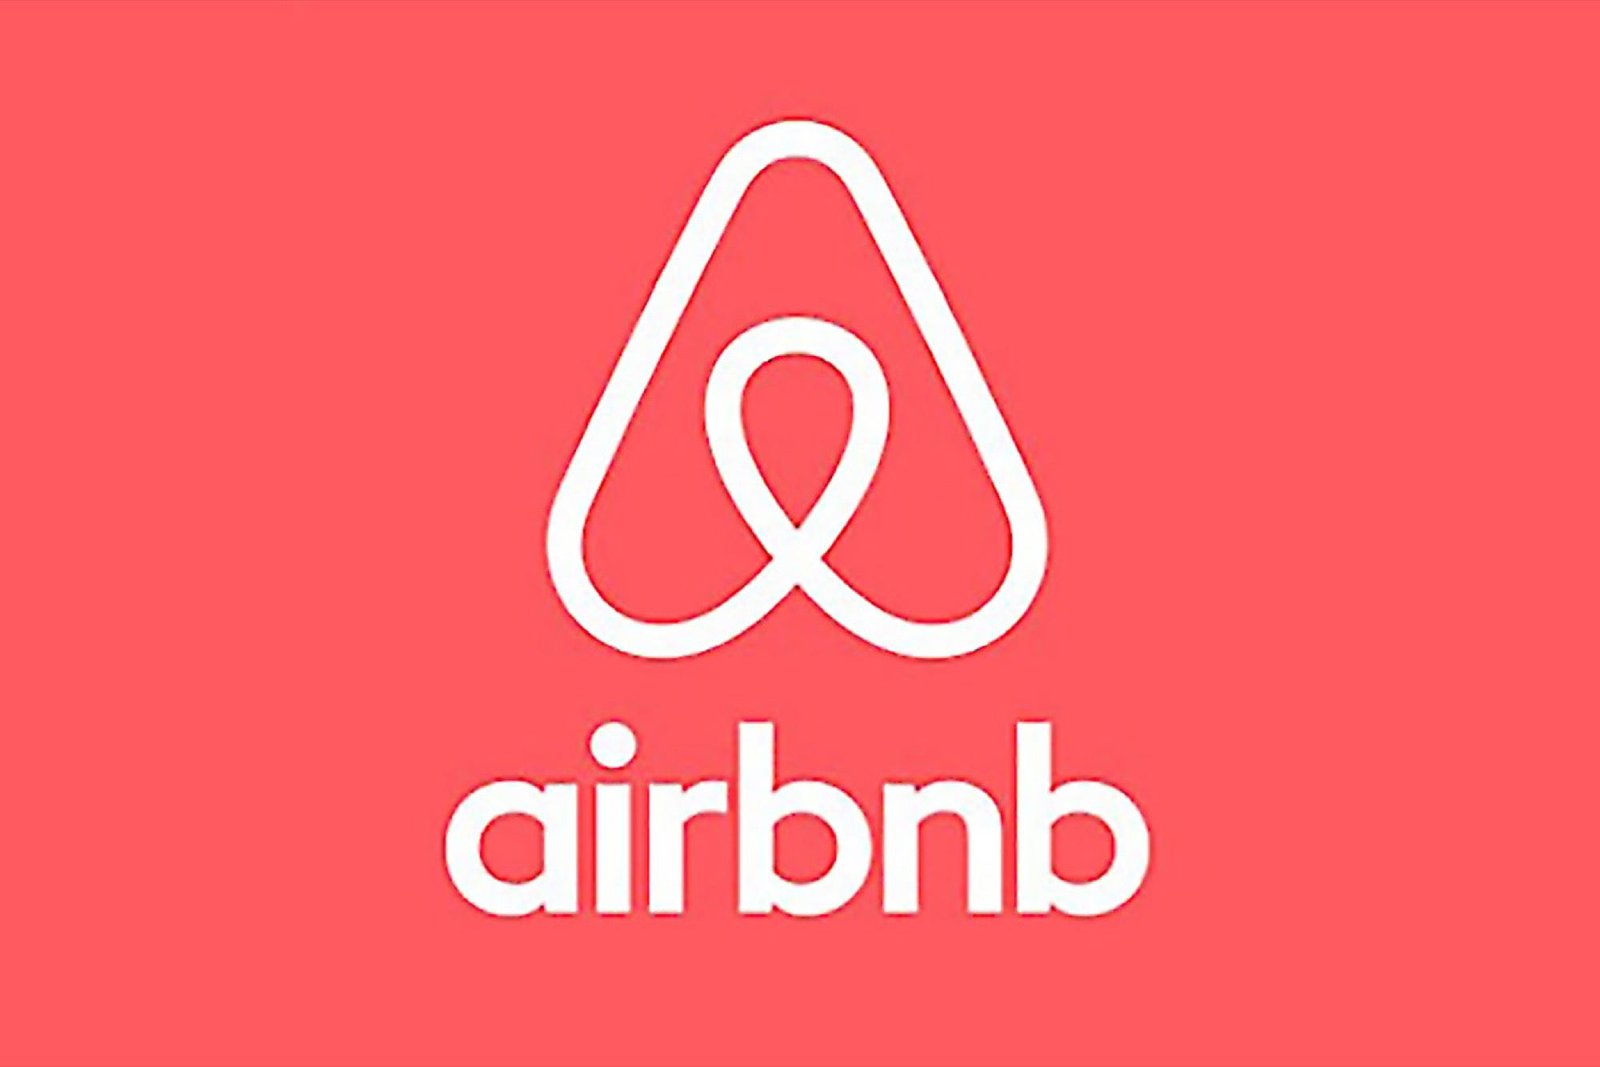 1405612741-airbnb-why-new-logo